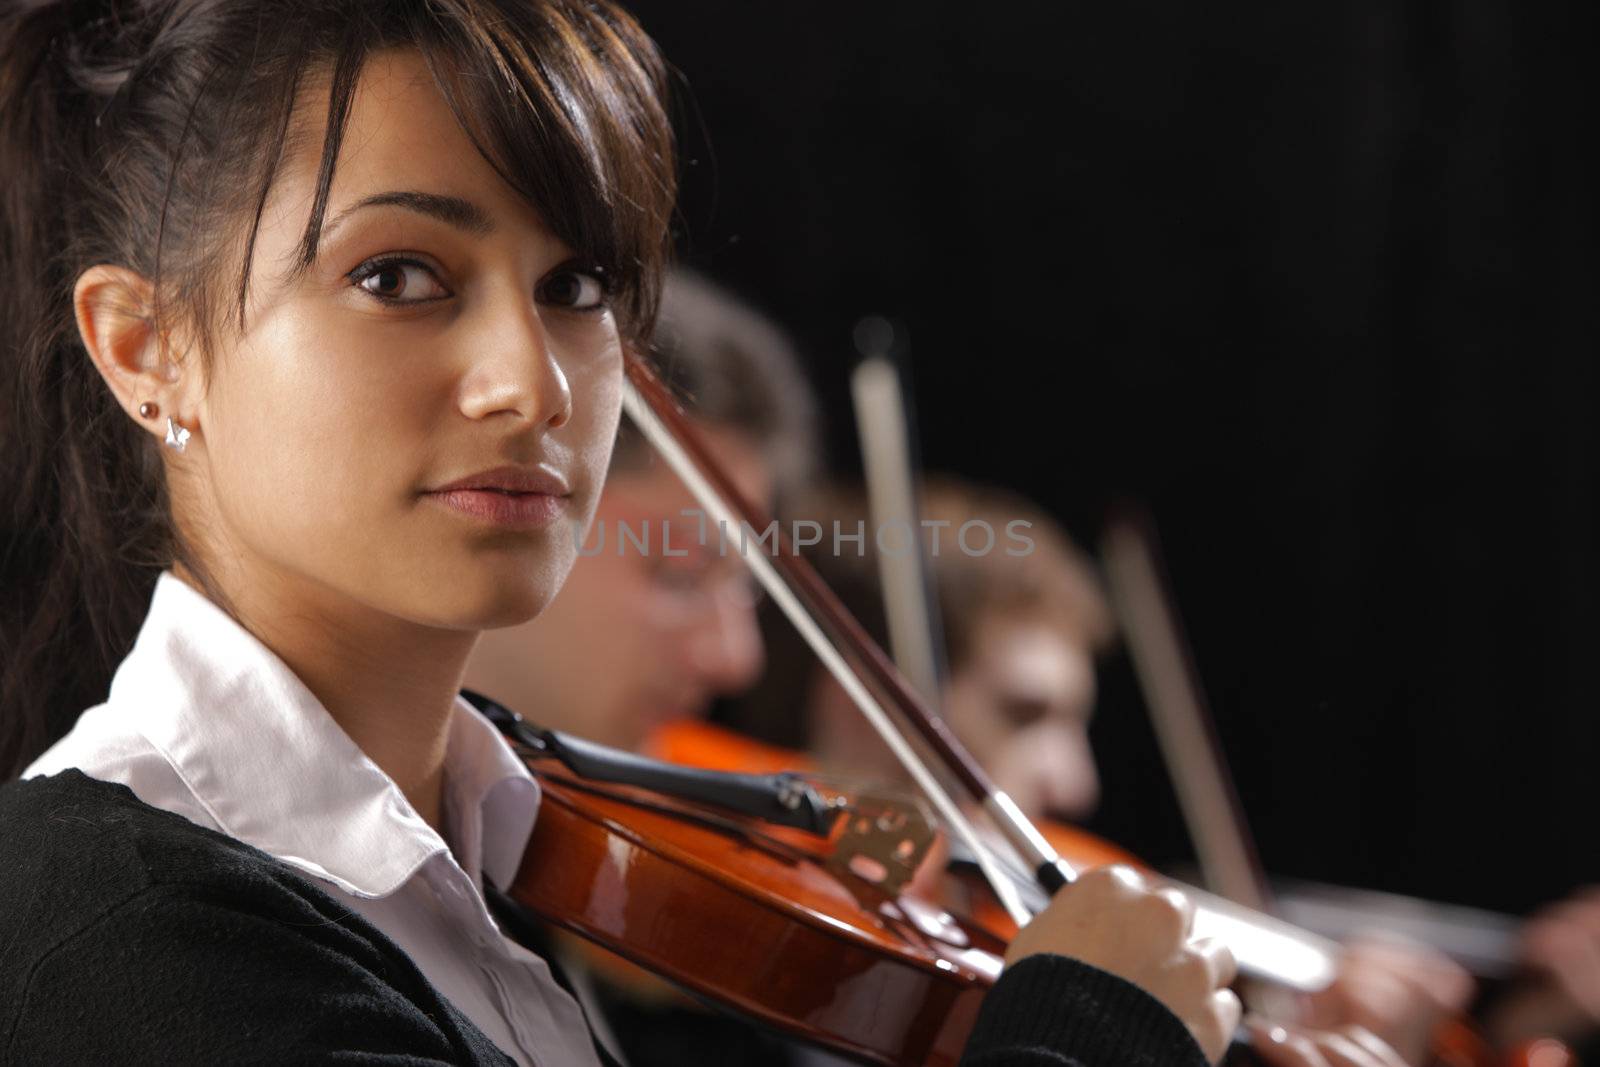 Classical music concert: Portrait of young woman violinist by stokkete